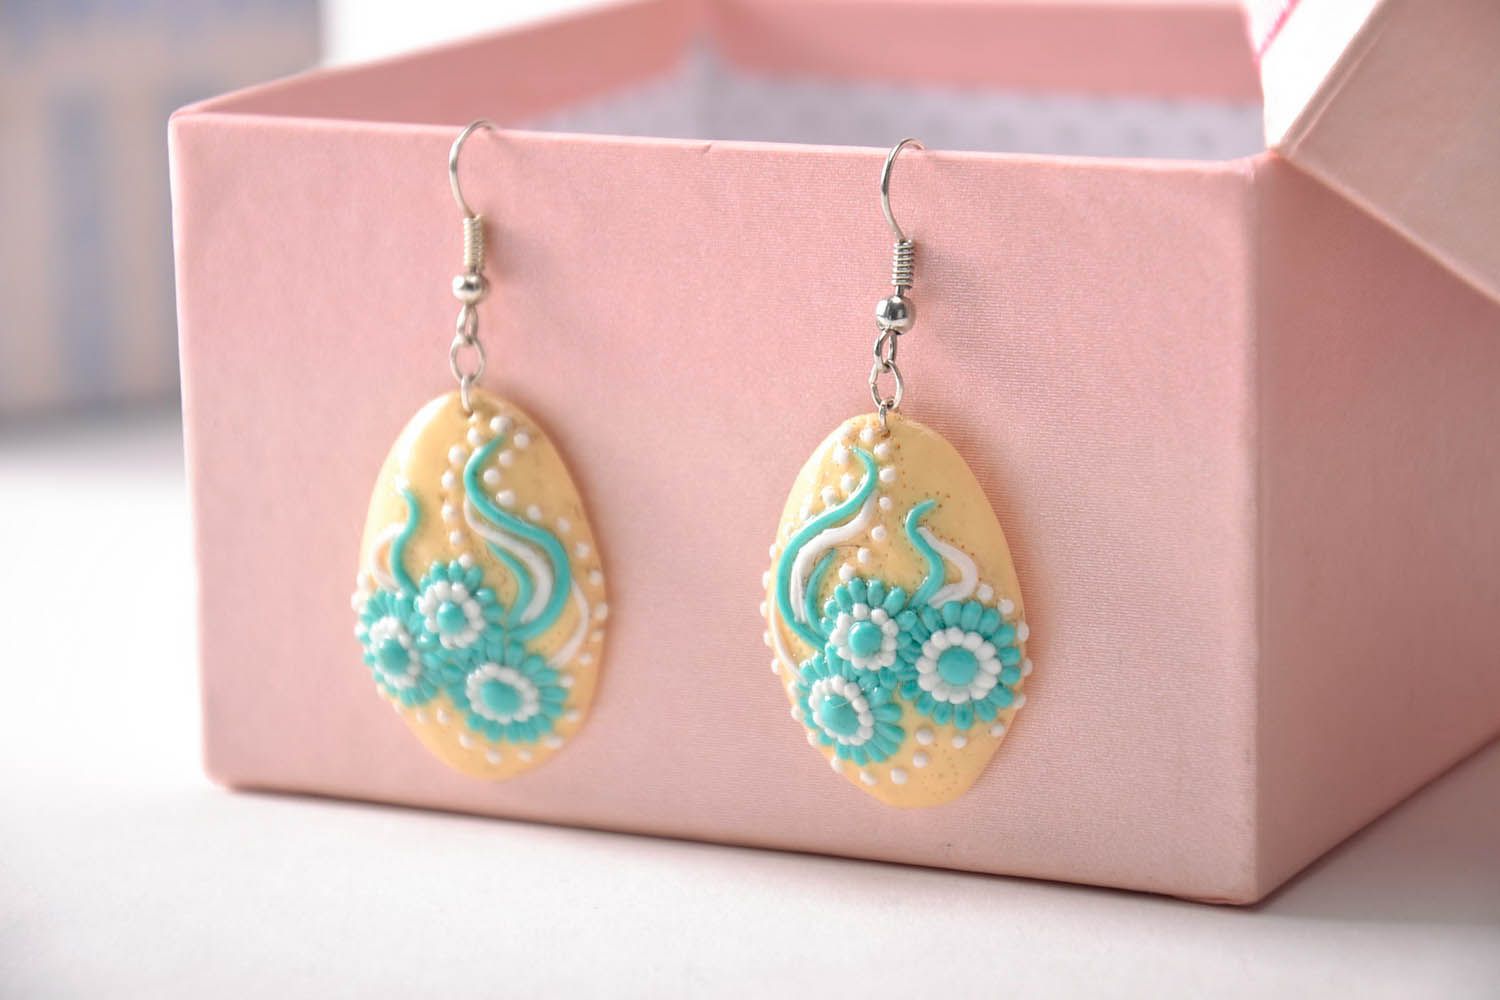 Author's earrings made using filigree technique photo 3